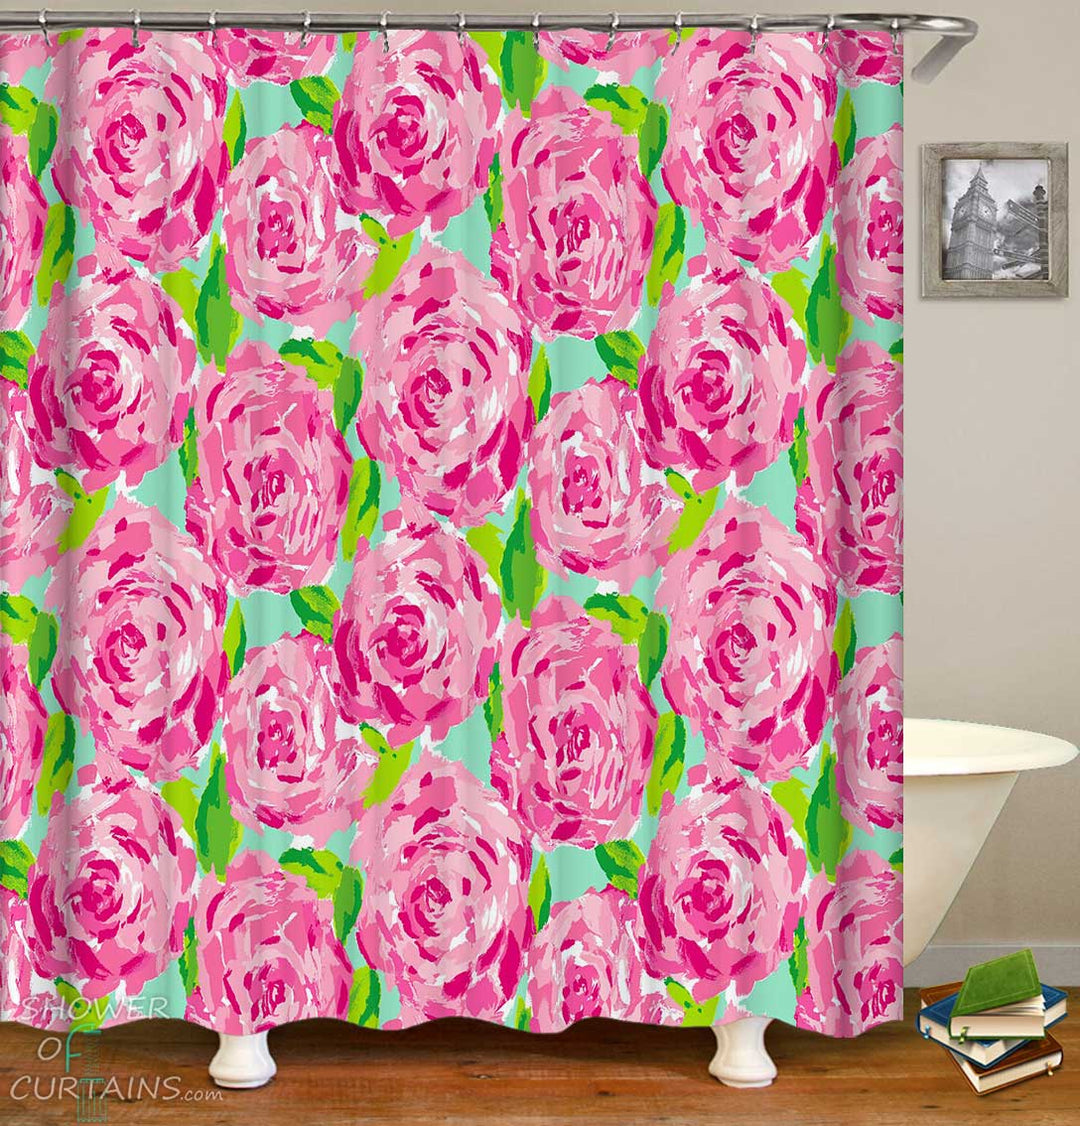 Shower Curtains with Shiny Pink Roses